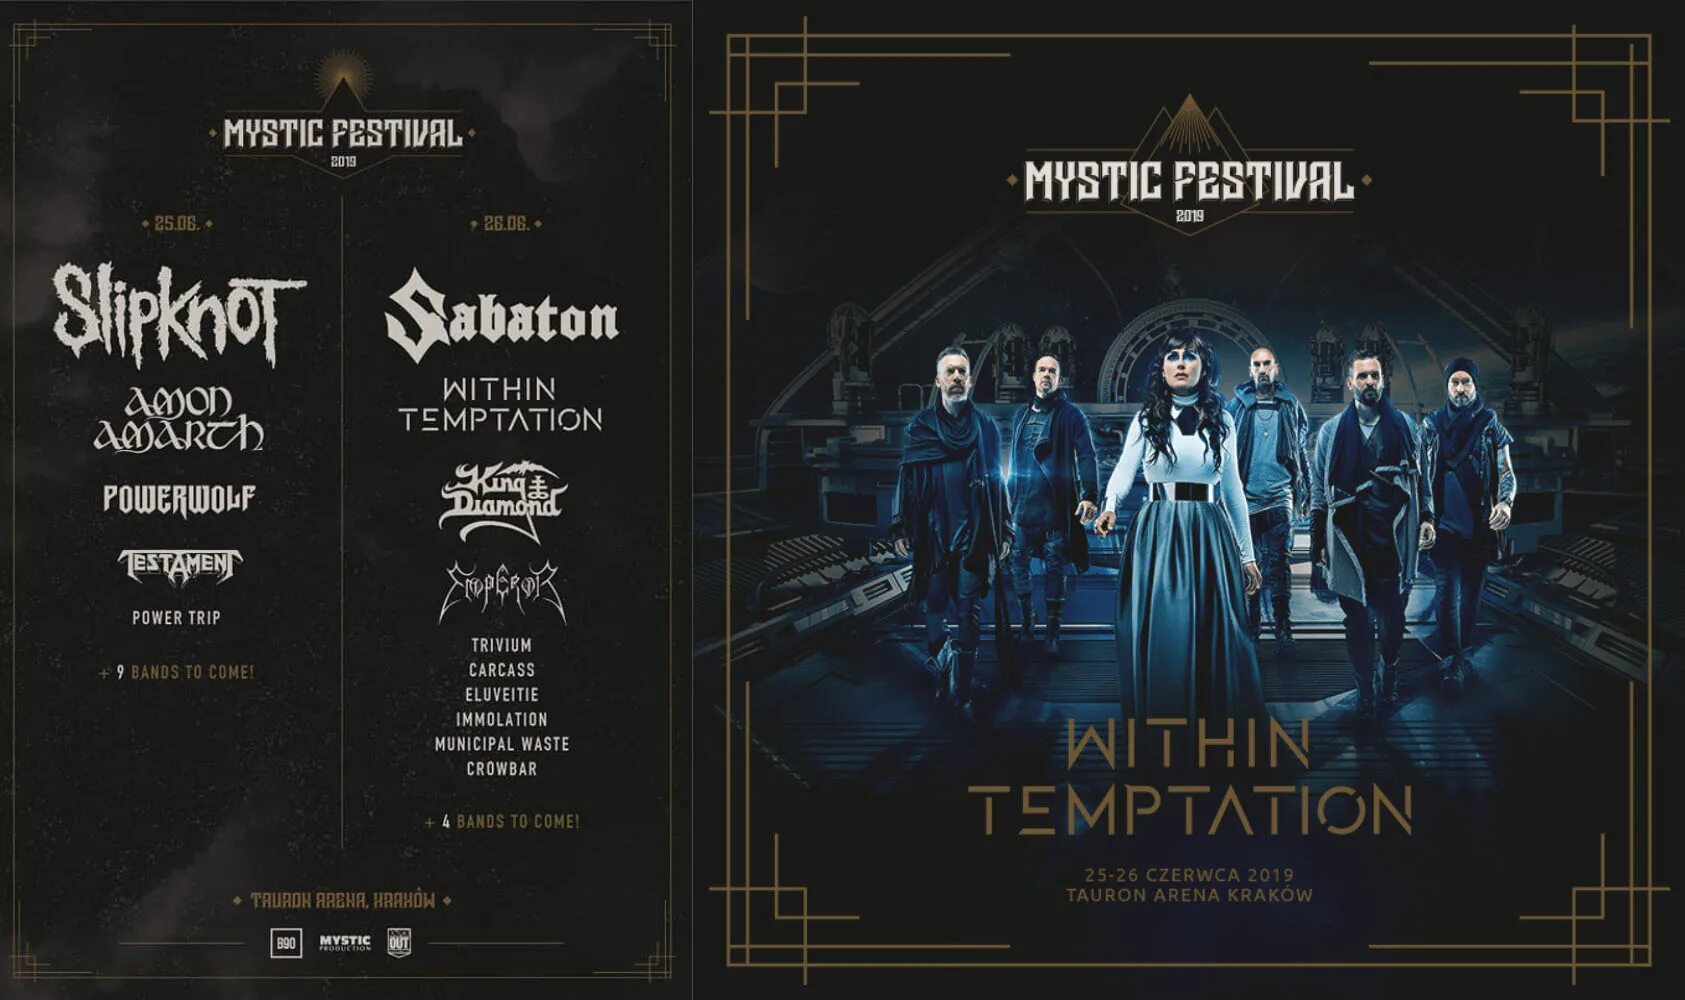 Within temptation альбомы. Within Temptation обложки. Within Temptation обложки альбомов. Within Temptation resist обложка. Within Temptation 2019.